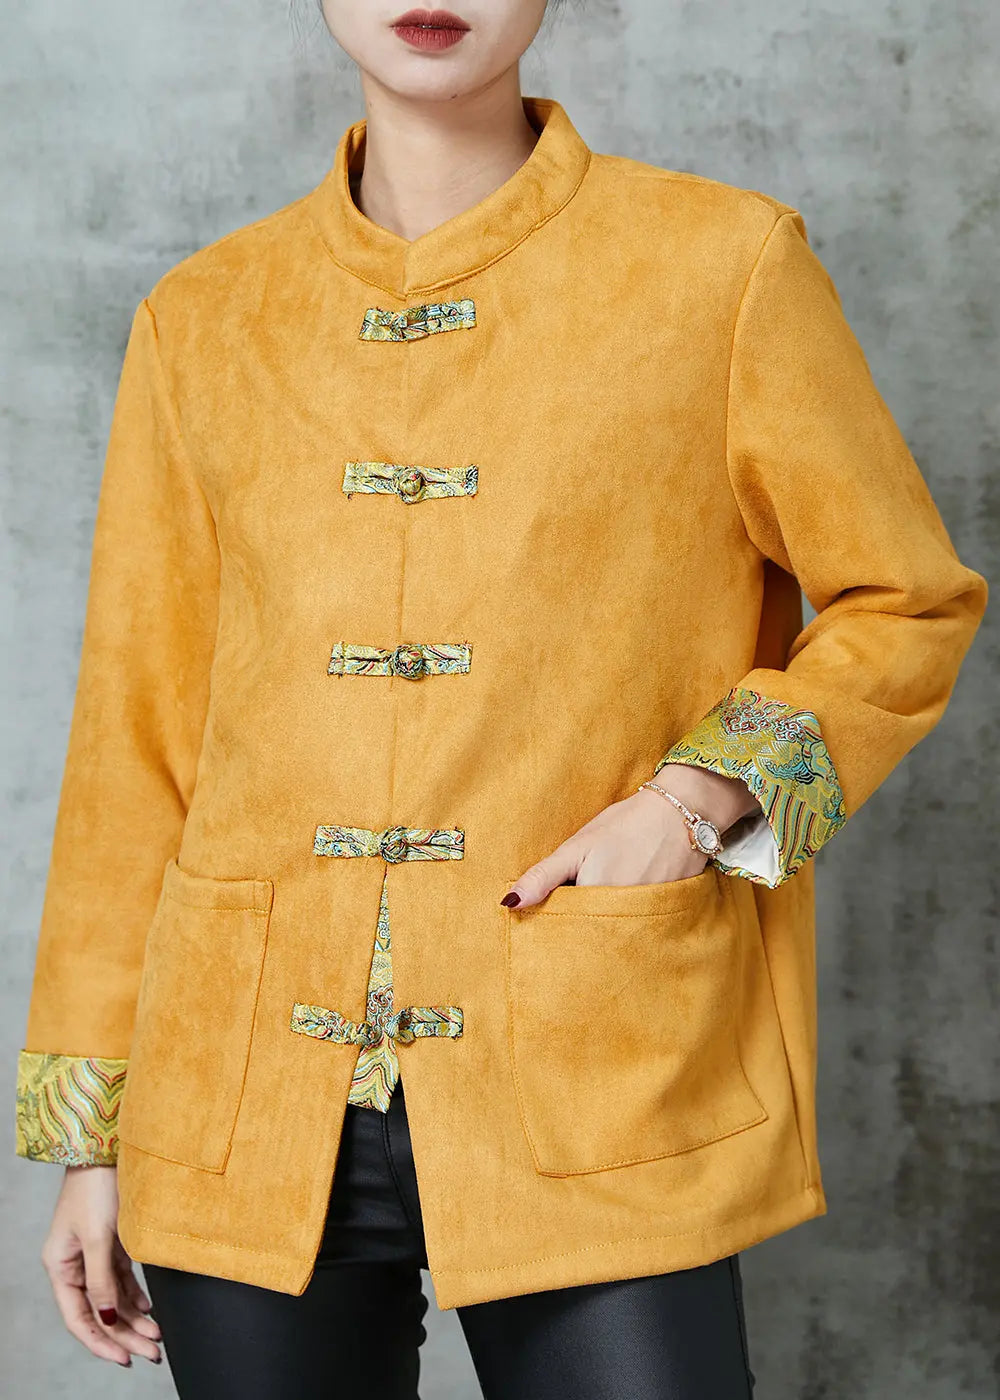 Unique Yellow Pockets Faux Suede Chinese Style Jackets Spring Ada Fashion